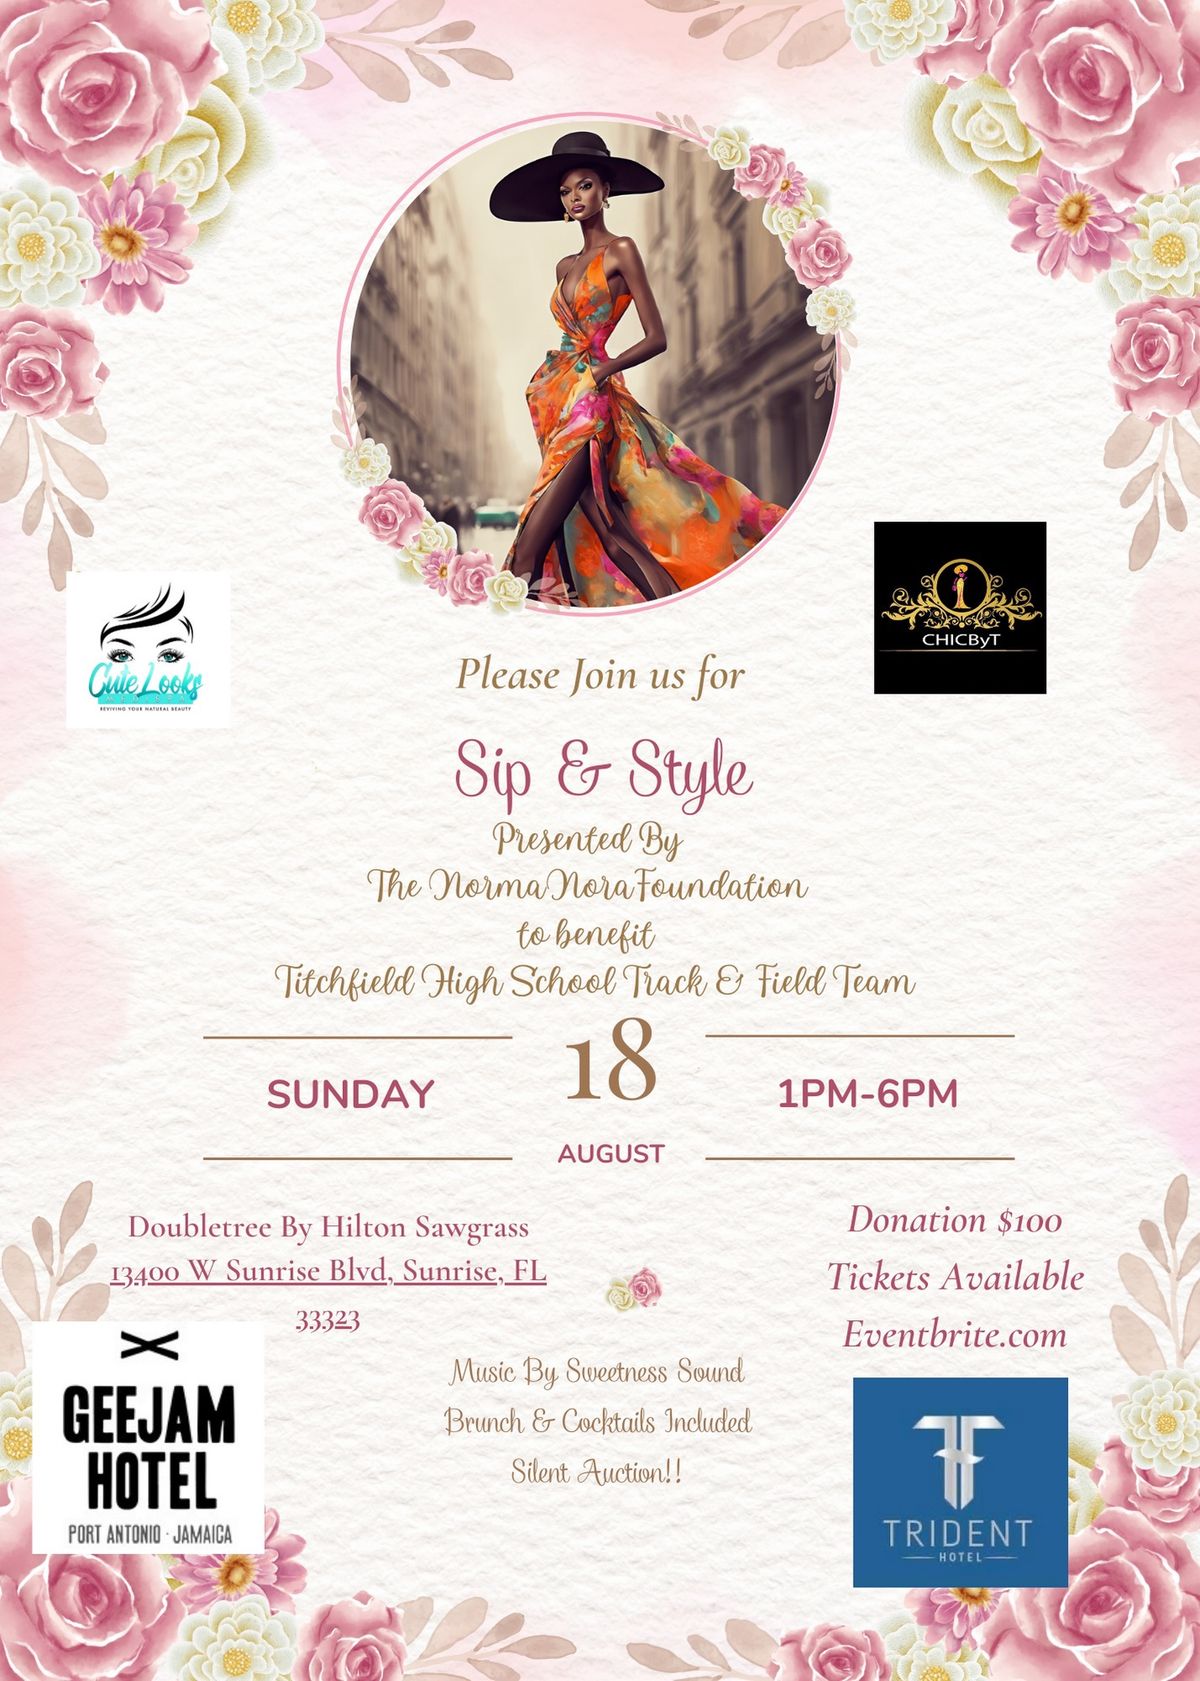 Sip & Style Presented by the Norma Nora Foundation